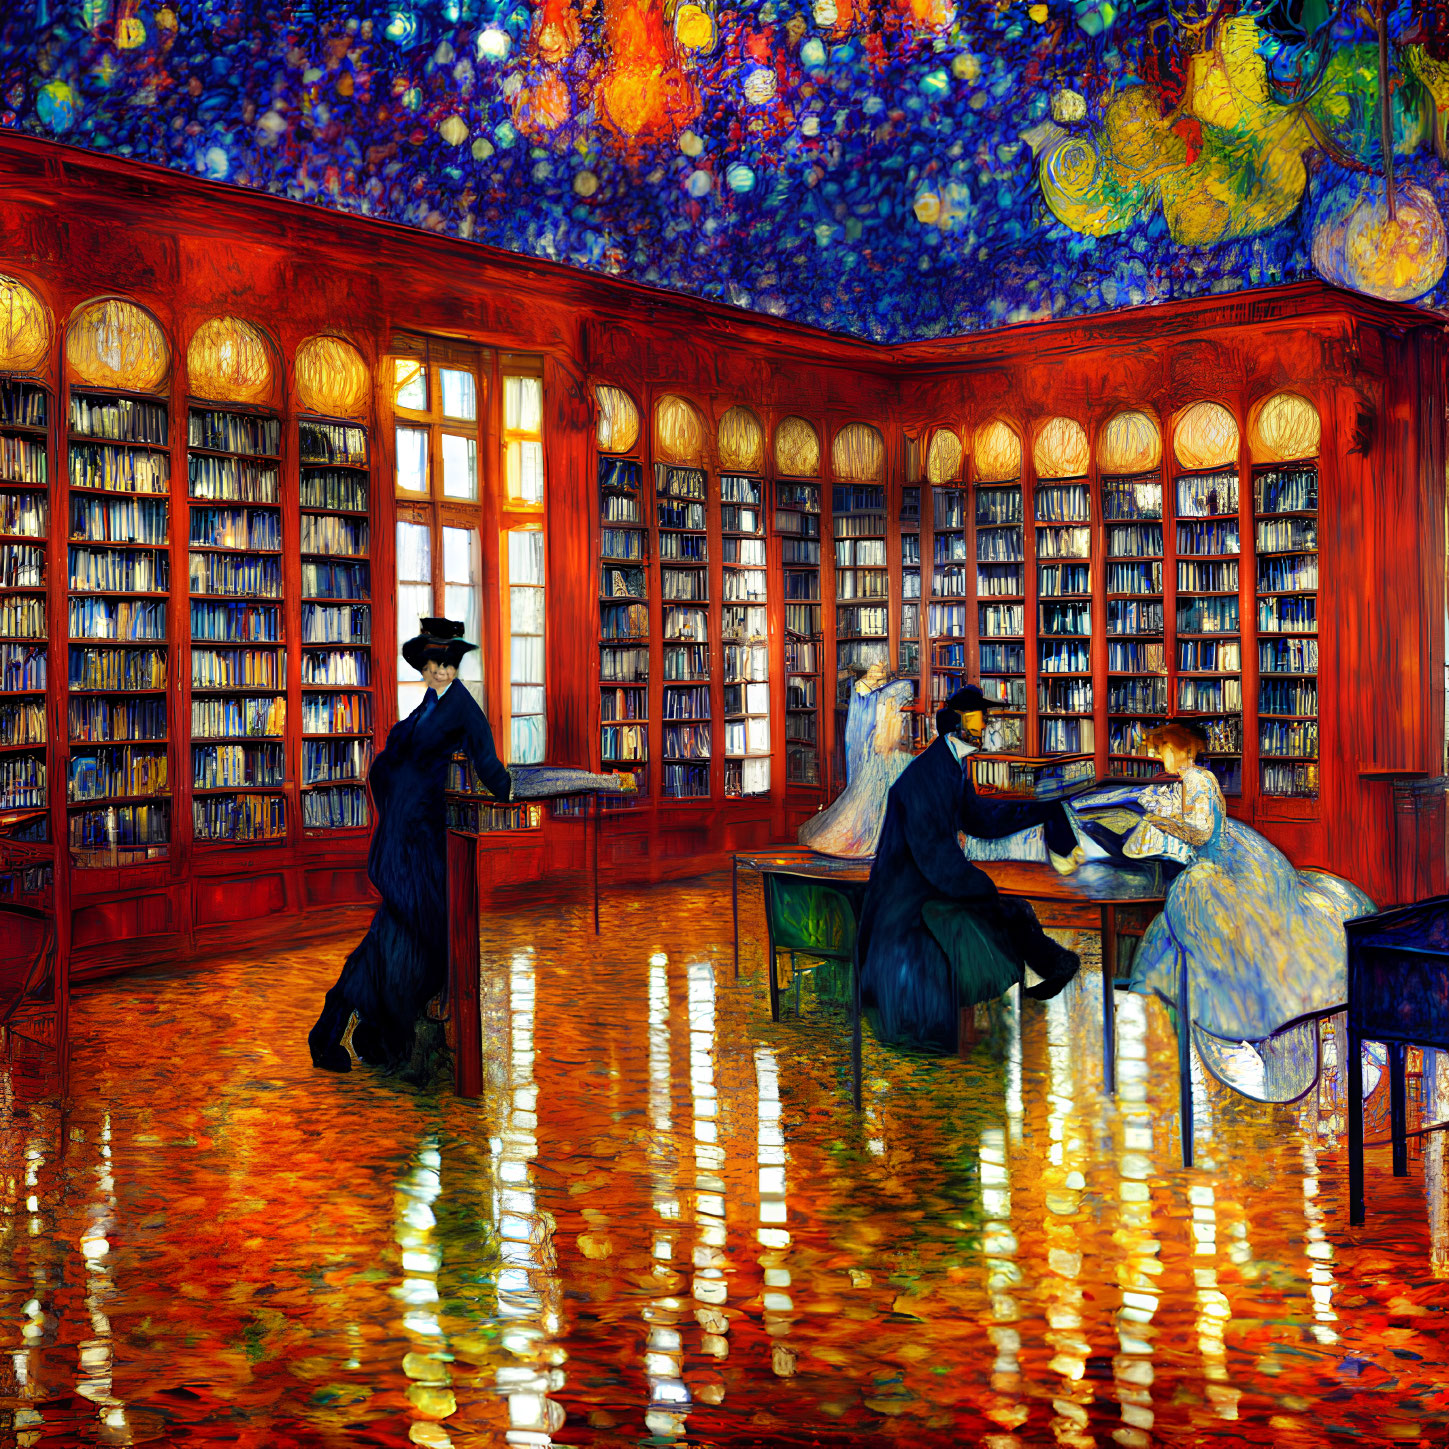 Vibrant impressionist painting of people in ornate library